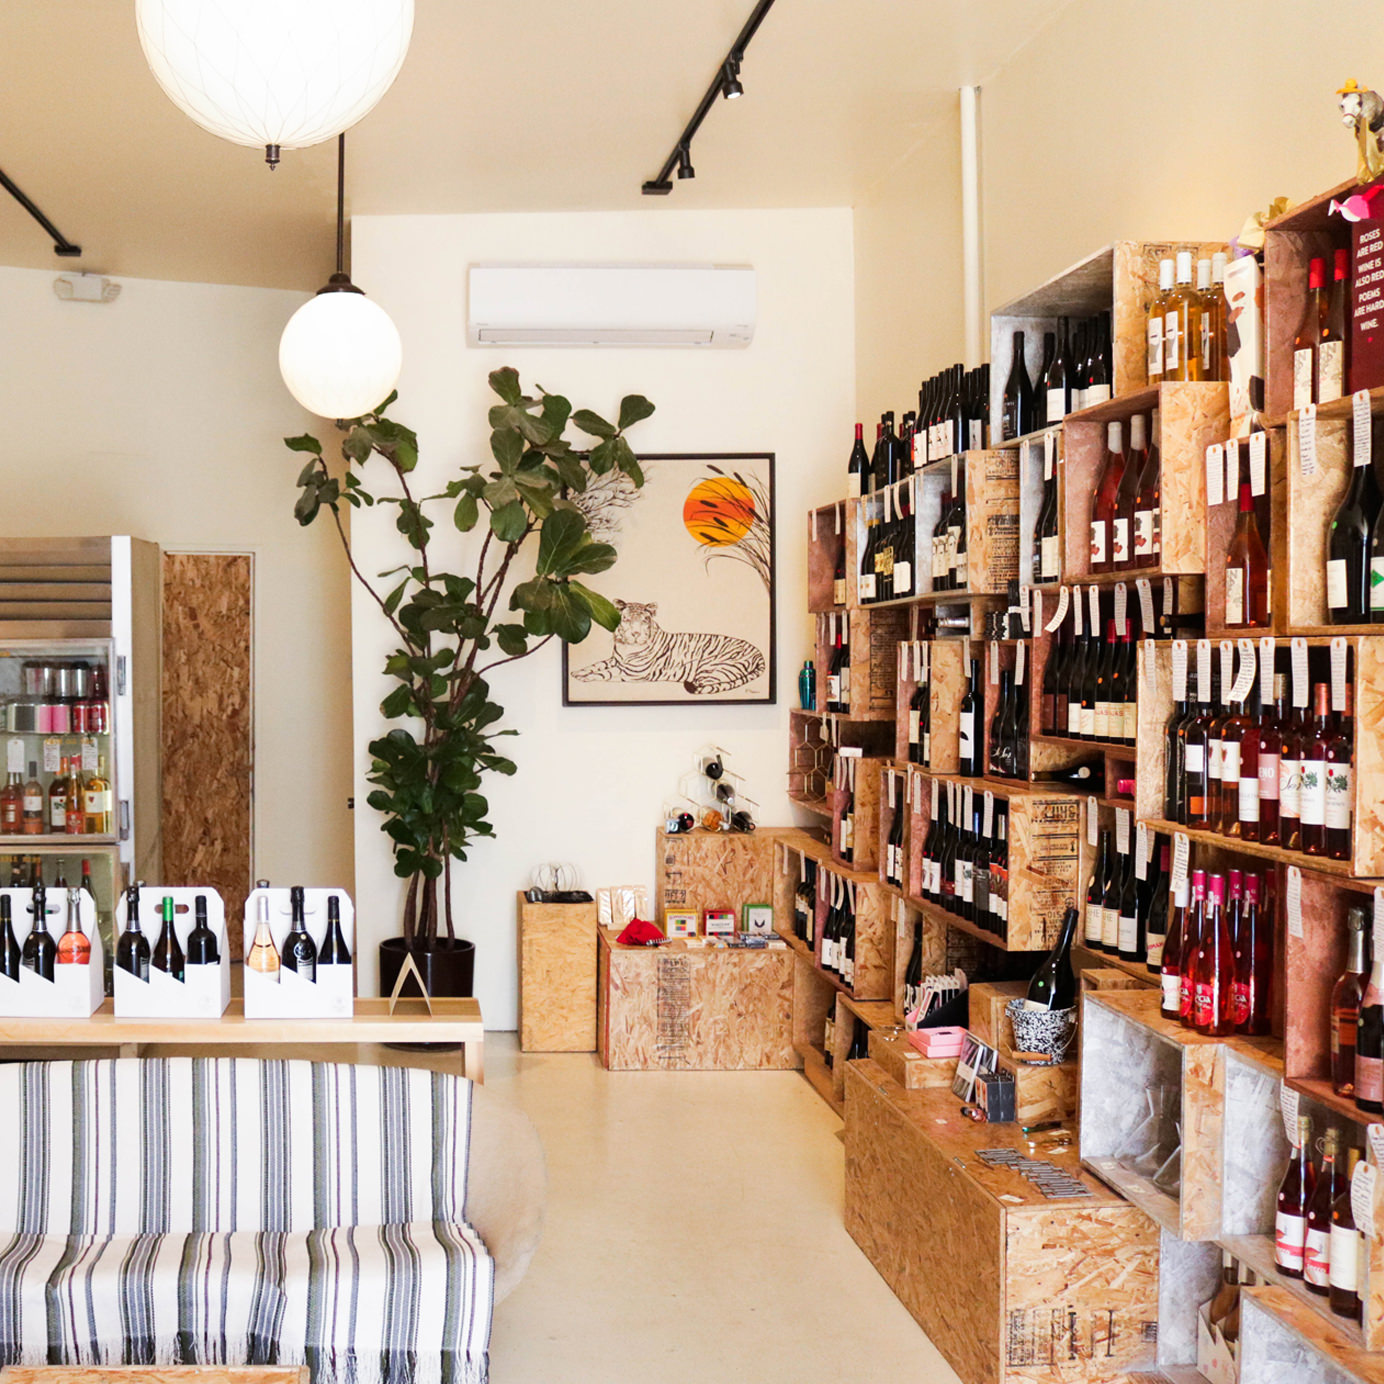 Three Secrets to Finding Wine Bargains, from O.G. Négociants to Bespoke Curators